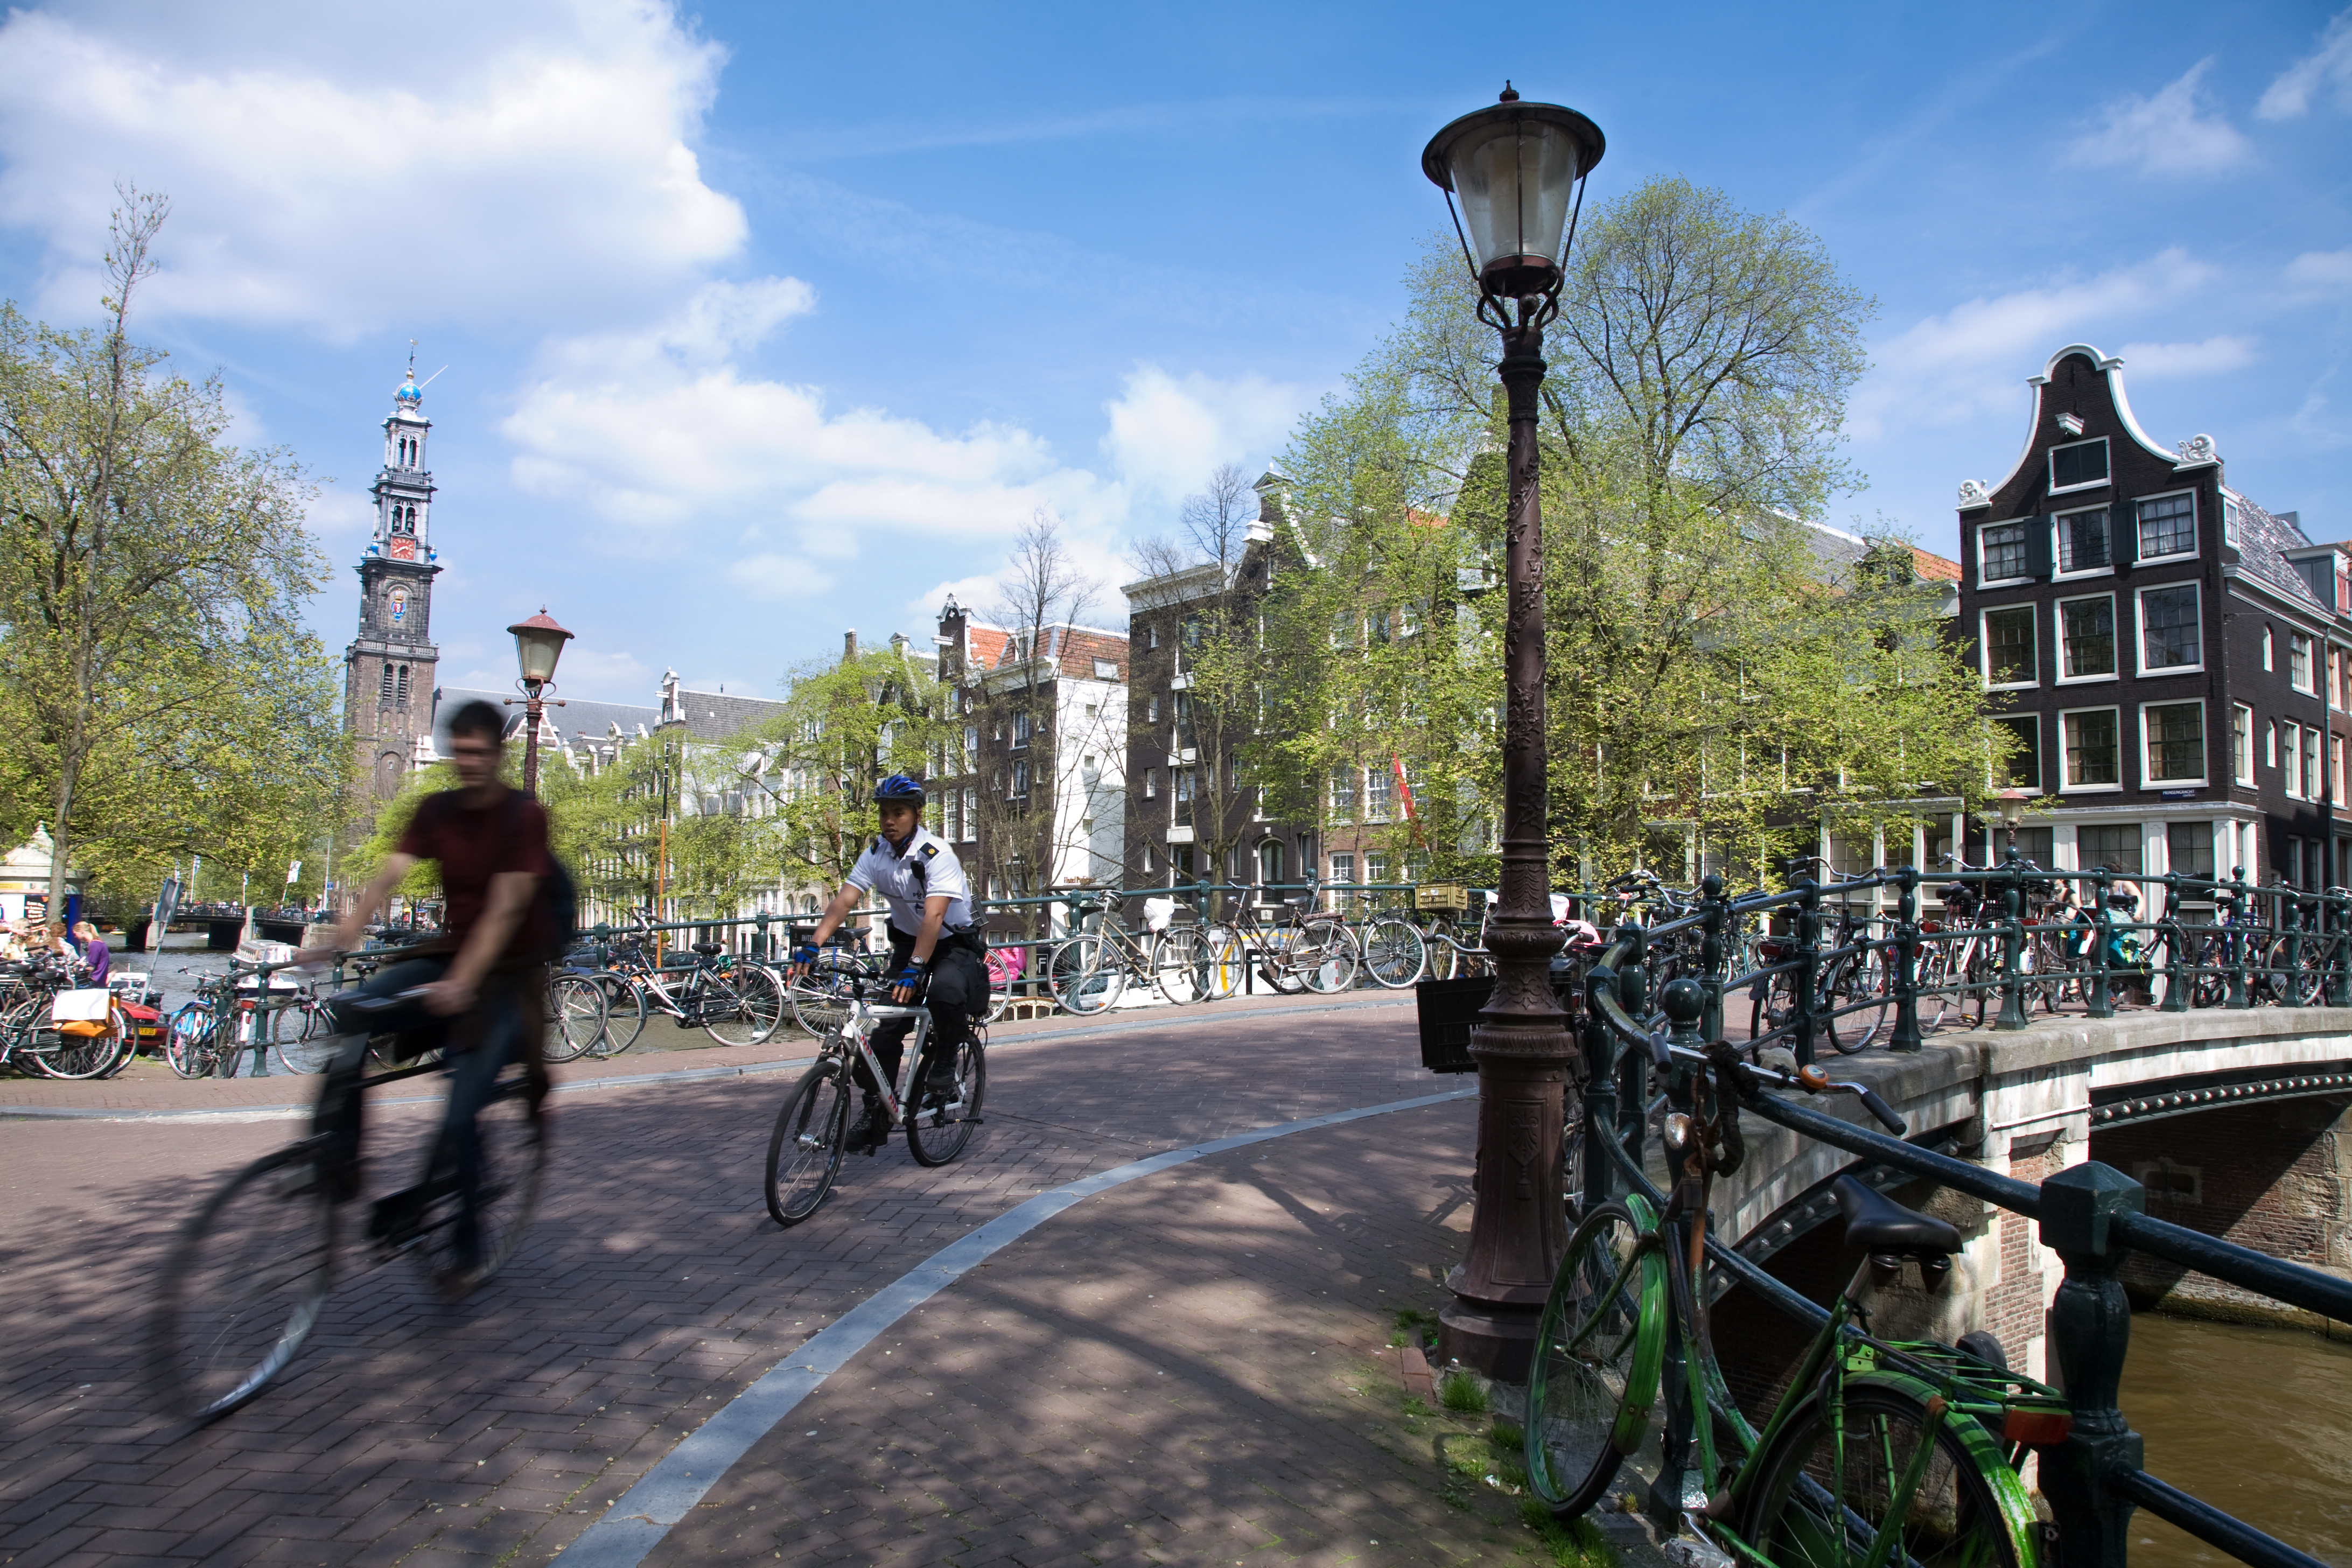 File:Amsterdam - Bicycles - 1058.jpg - Wikimedia Commons